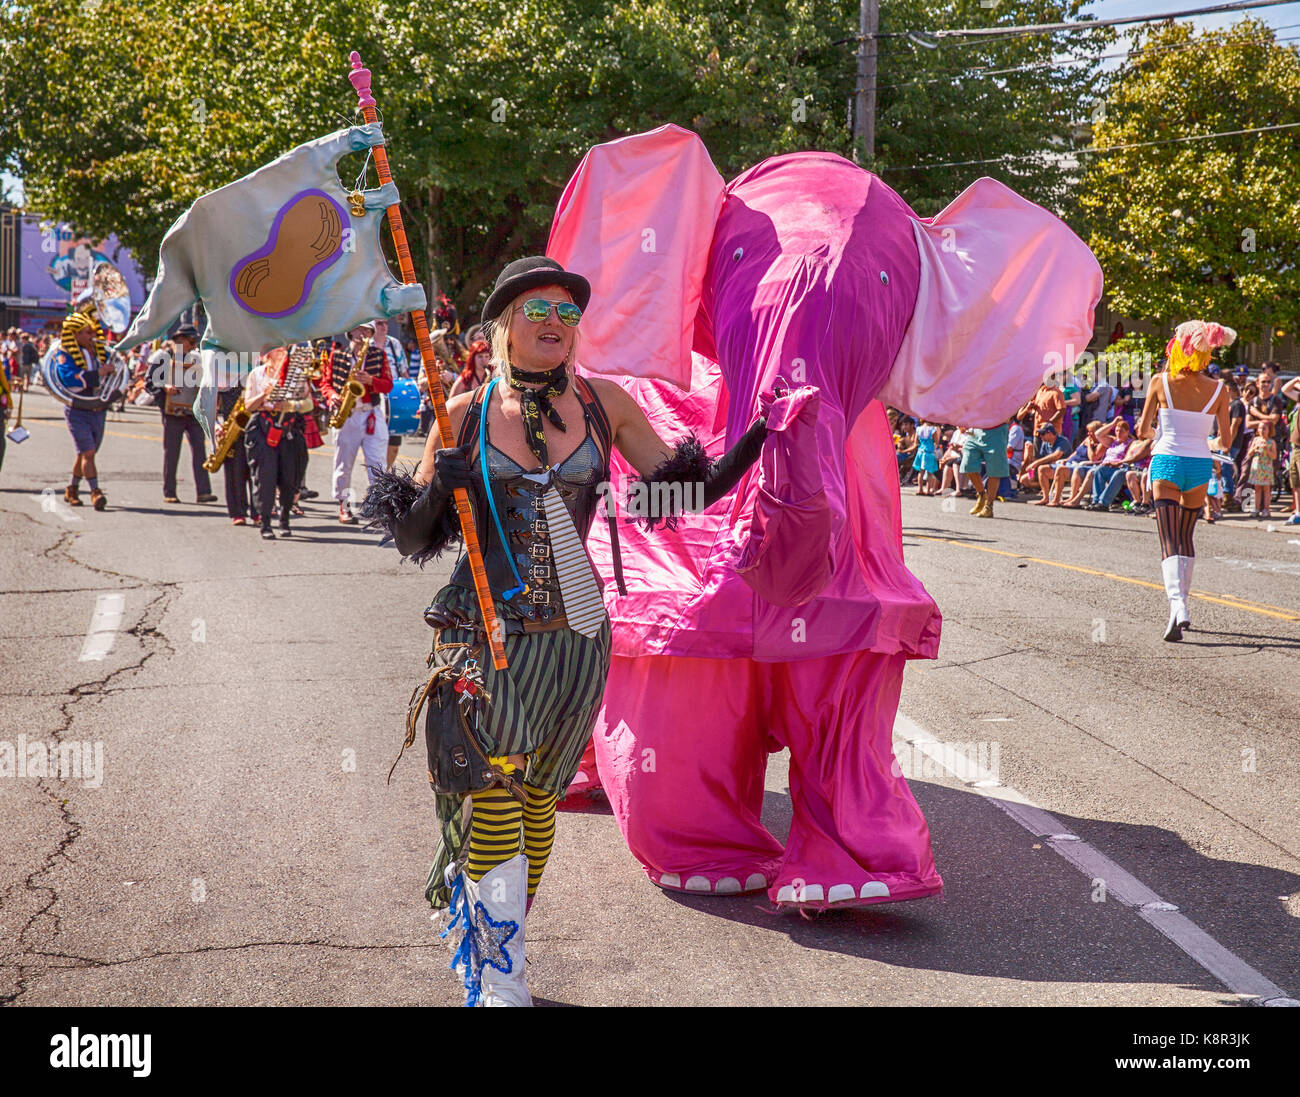 SEATTLE, WA - JUNE 22, 2013: An unidentified woman in a steampunk costume appears to be leading a pink elephant through the street during the annual F Stock Photo